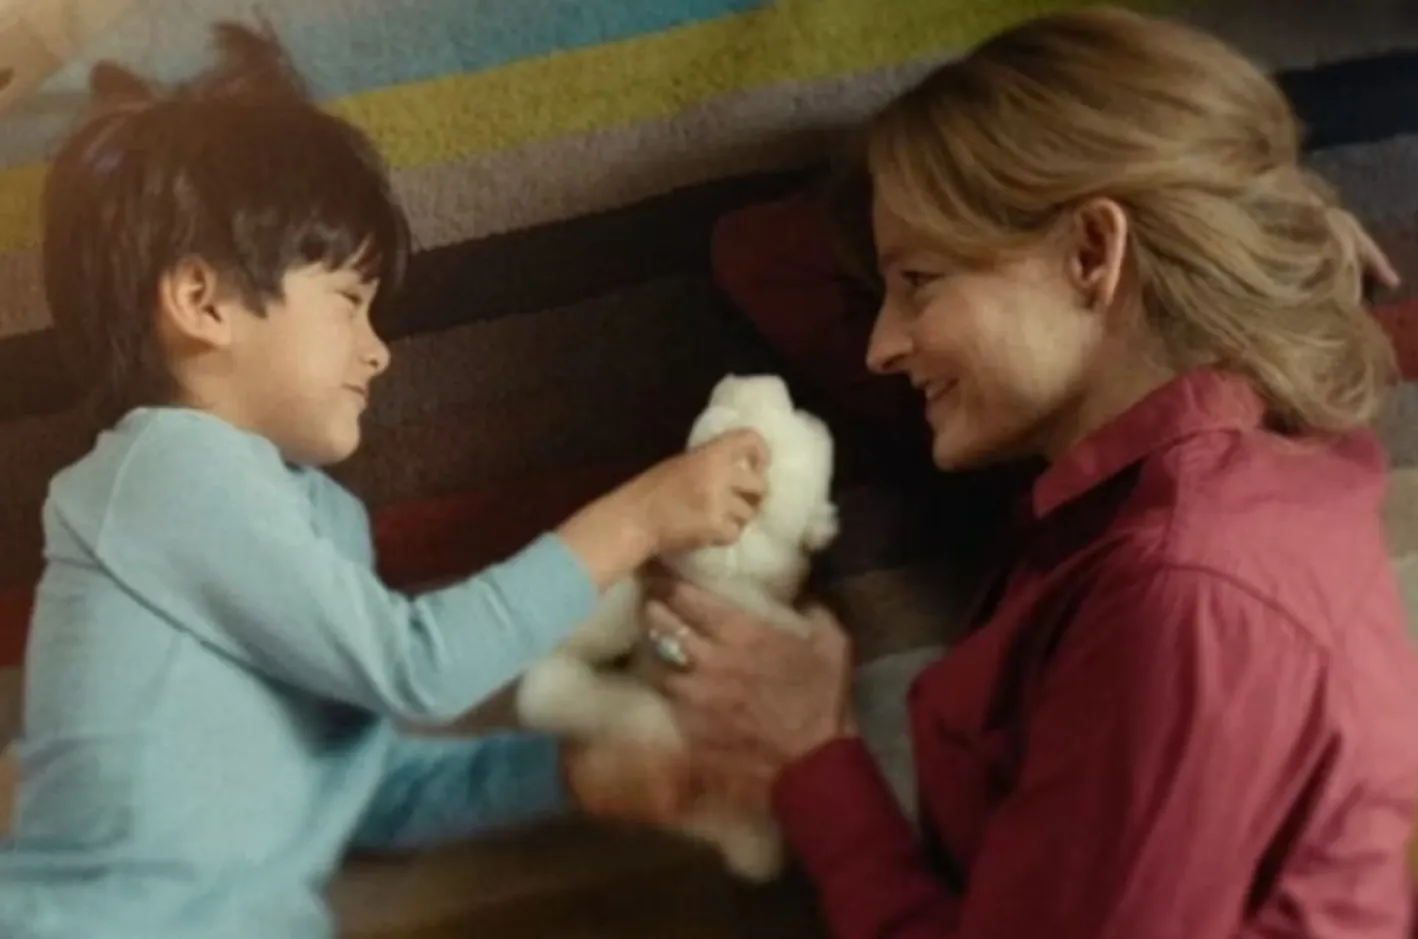 Holden and Liz Danvers (Jodie Foster) play with a toy polar bear in 'True Detective: Night Country'.